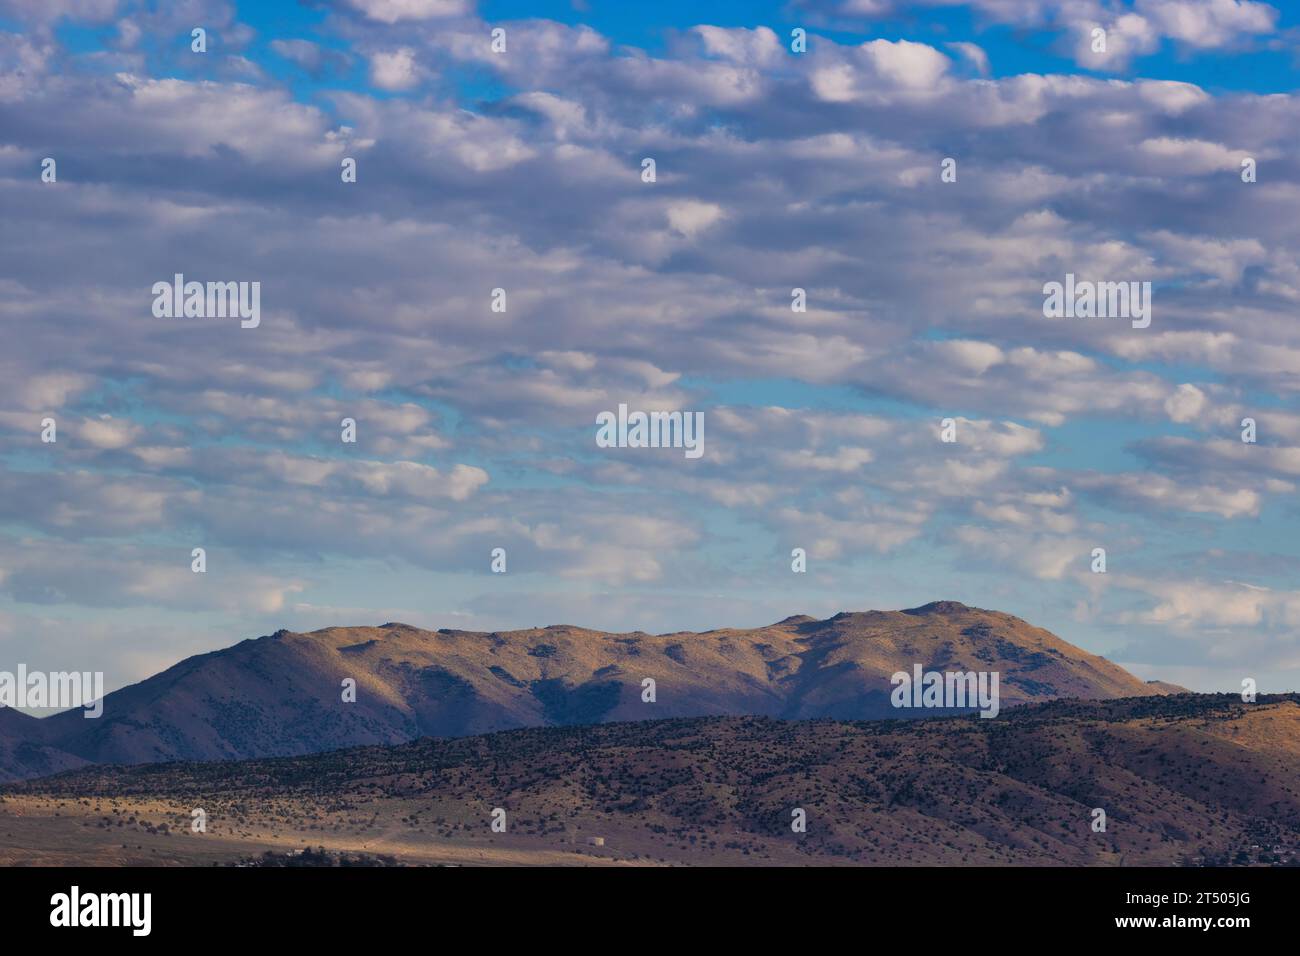 Clouds above the mountains in this landscape view from Stead Airport in Nevada. Stock Photo